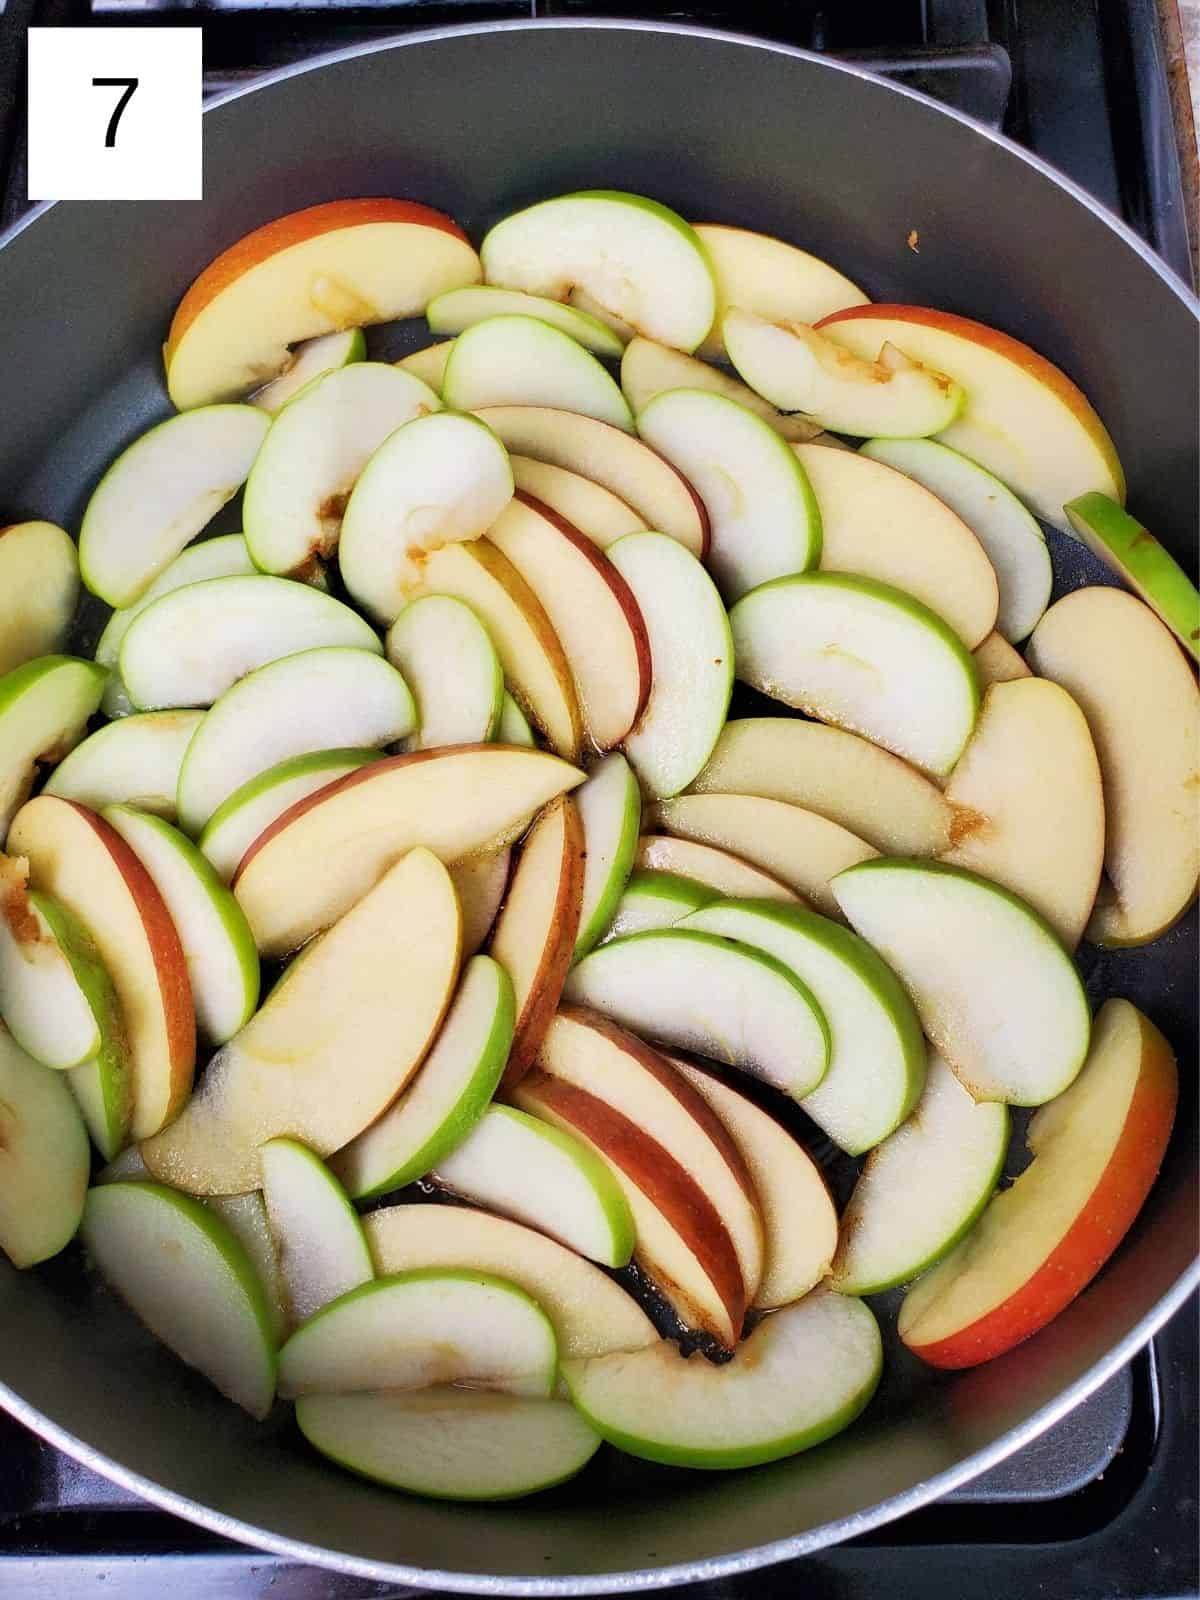 evenly cut slices of apples layered in a pan.